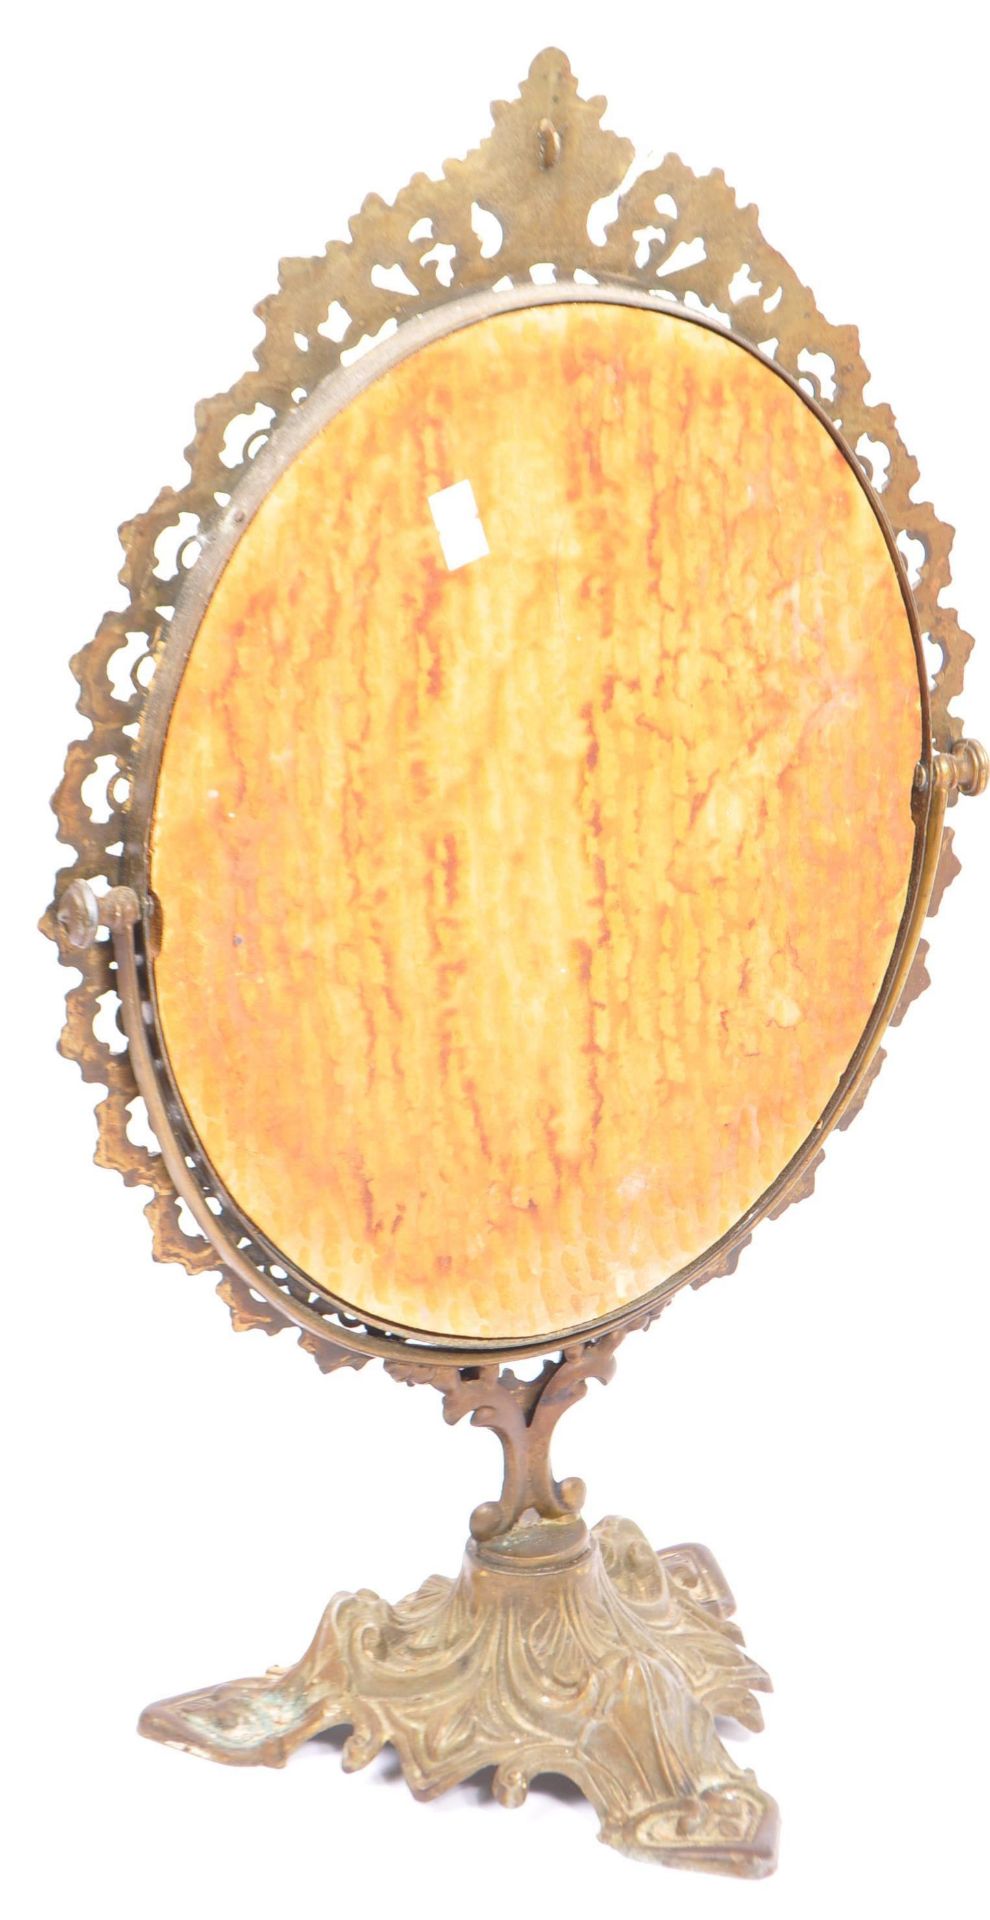 EARLY 20TH CENTURY FRENCH ROCOCO STYLE FREE STANDINGH MIRROR - Image 5 of 5